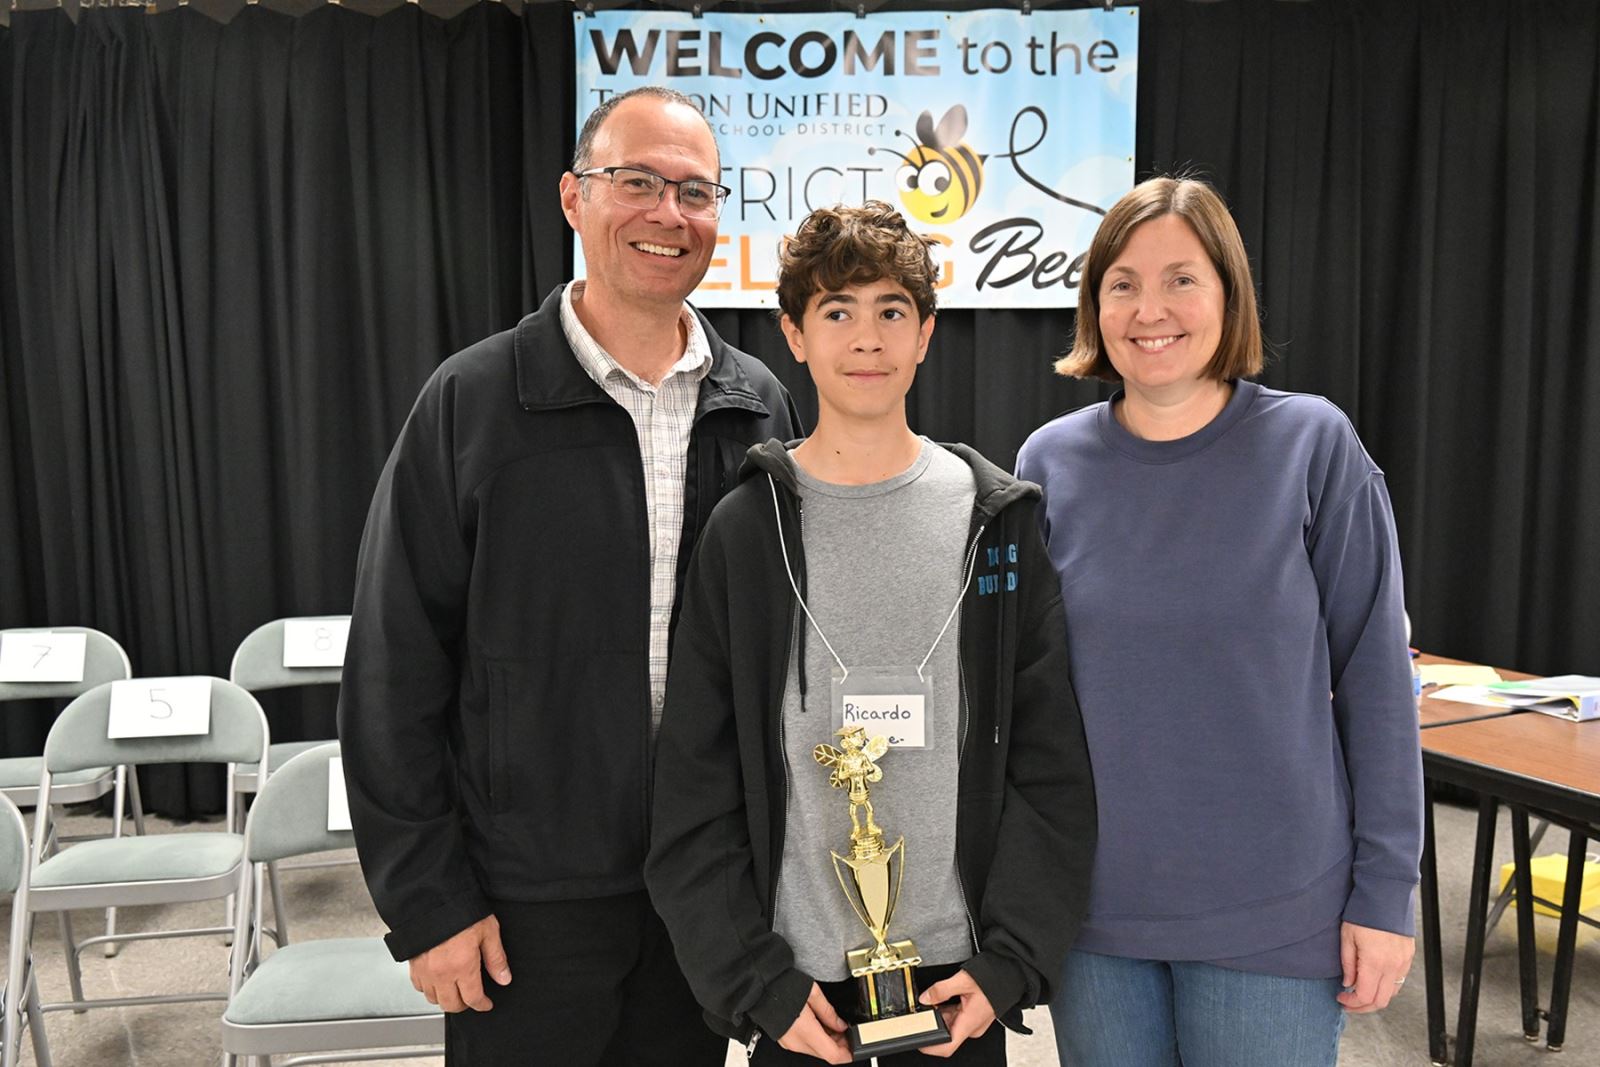 The spelling bee champ poses with his trophy and his parents.